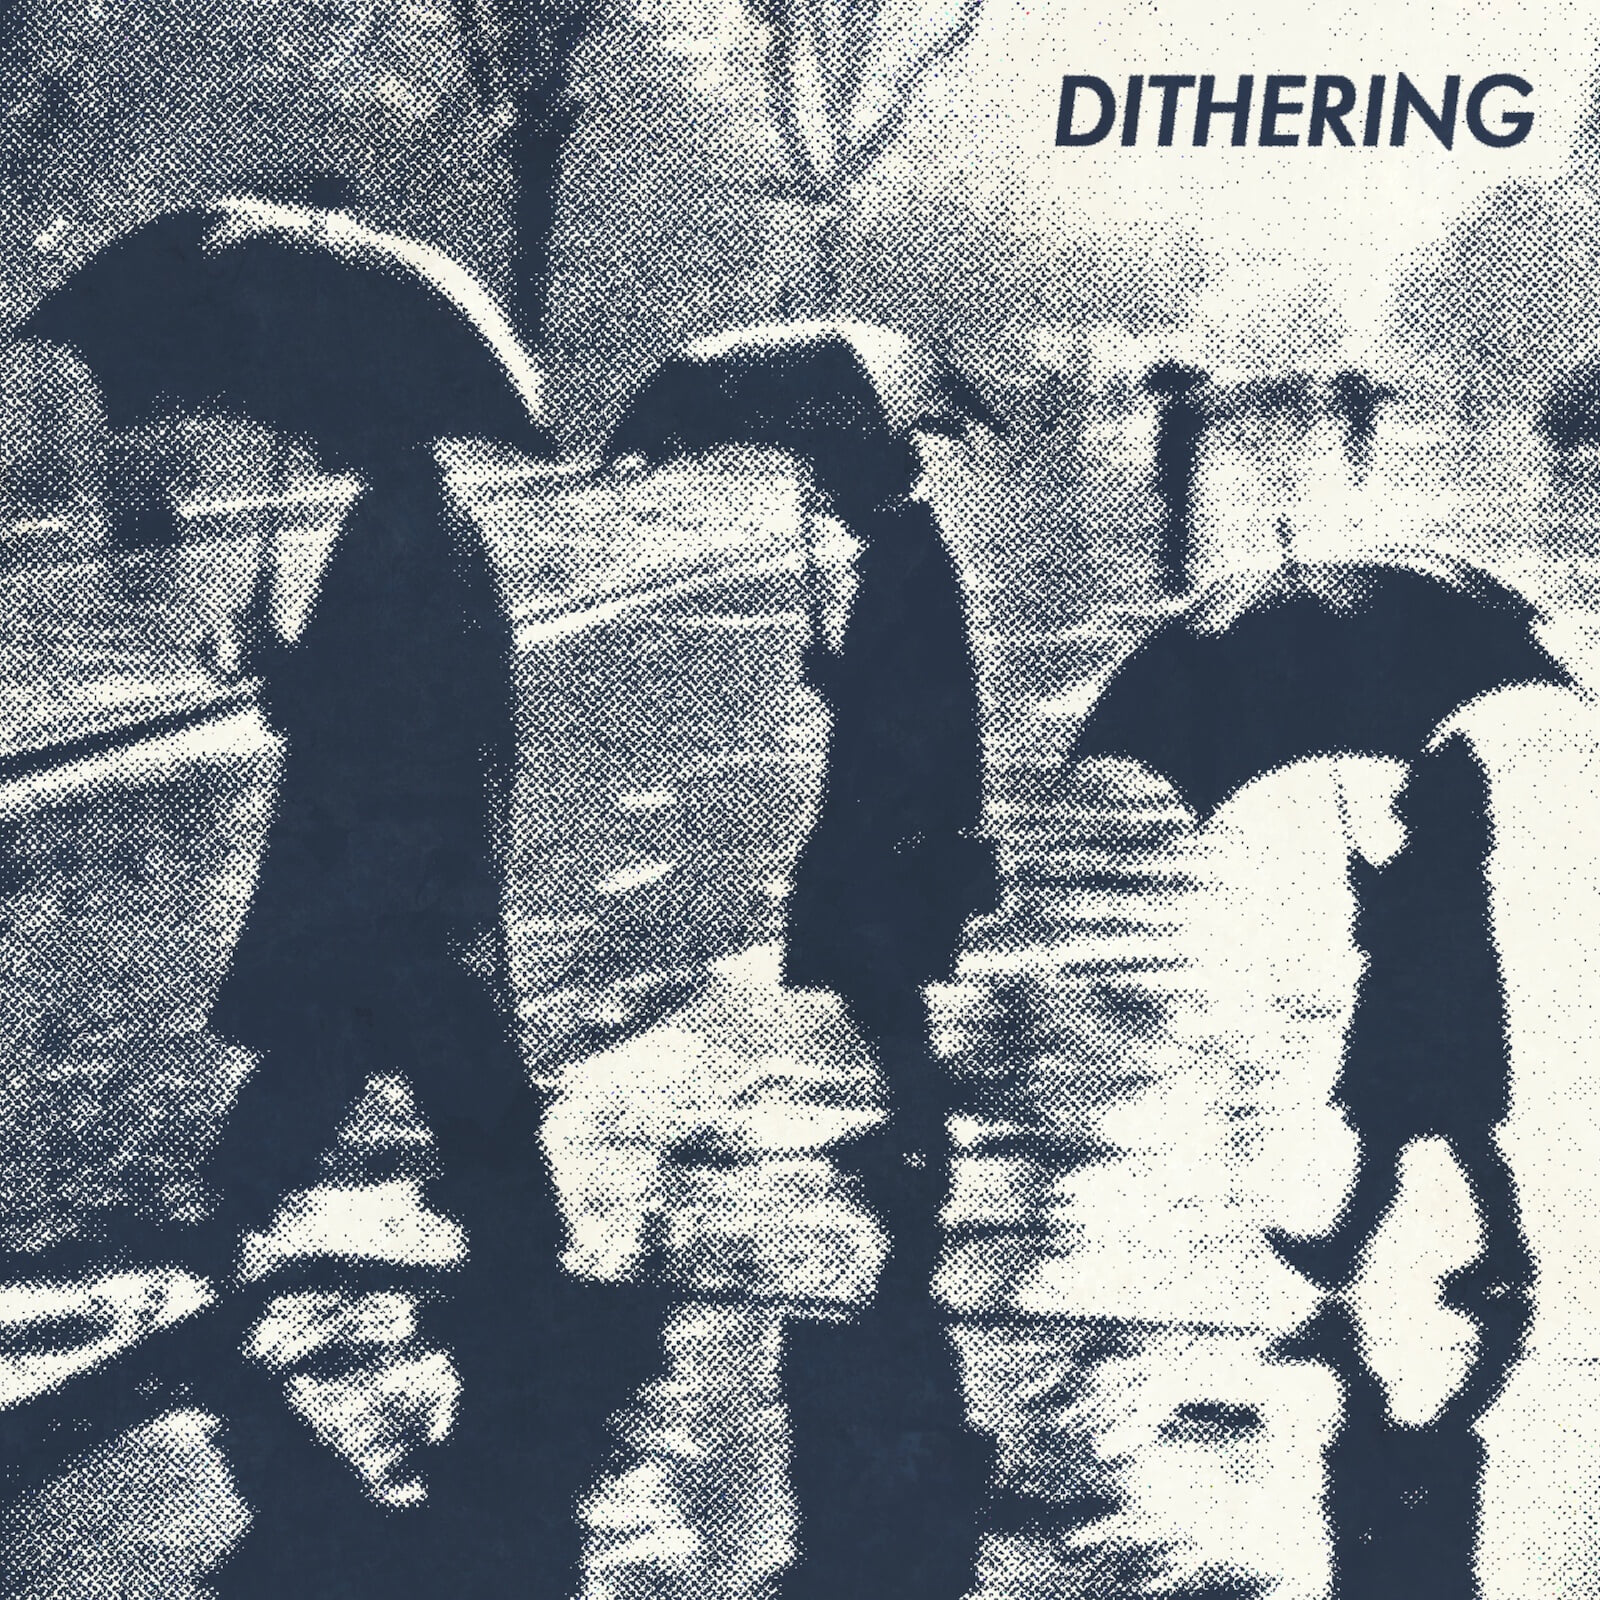 November 2023 cover art for Dithering, depicting a family in silhouette, holdings umbrellas, crossing the street on a rainy fall day.